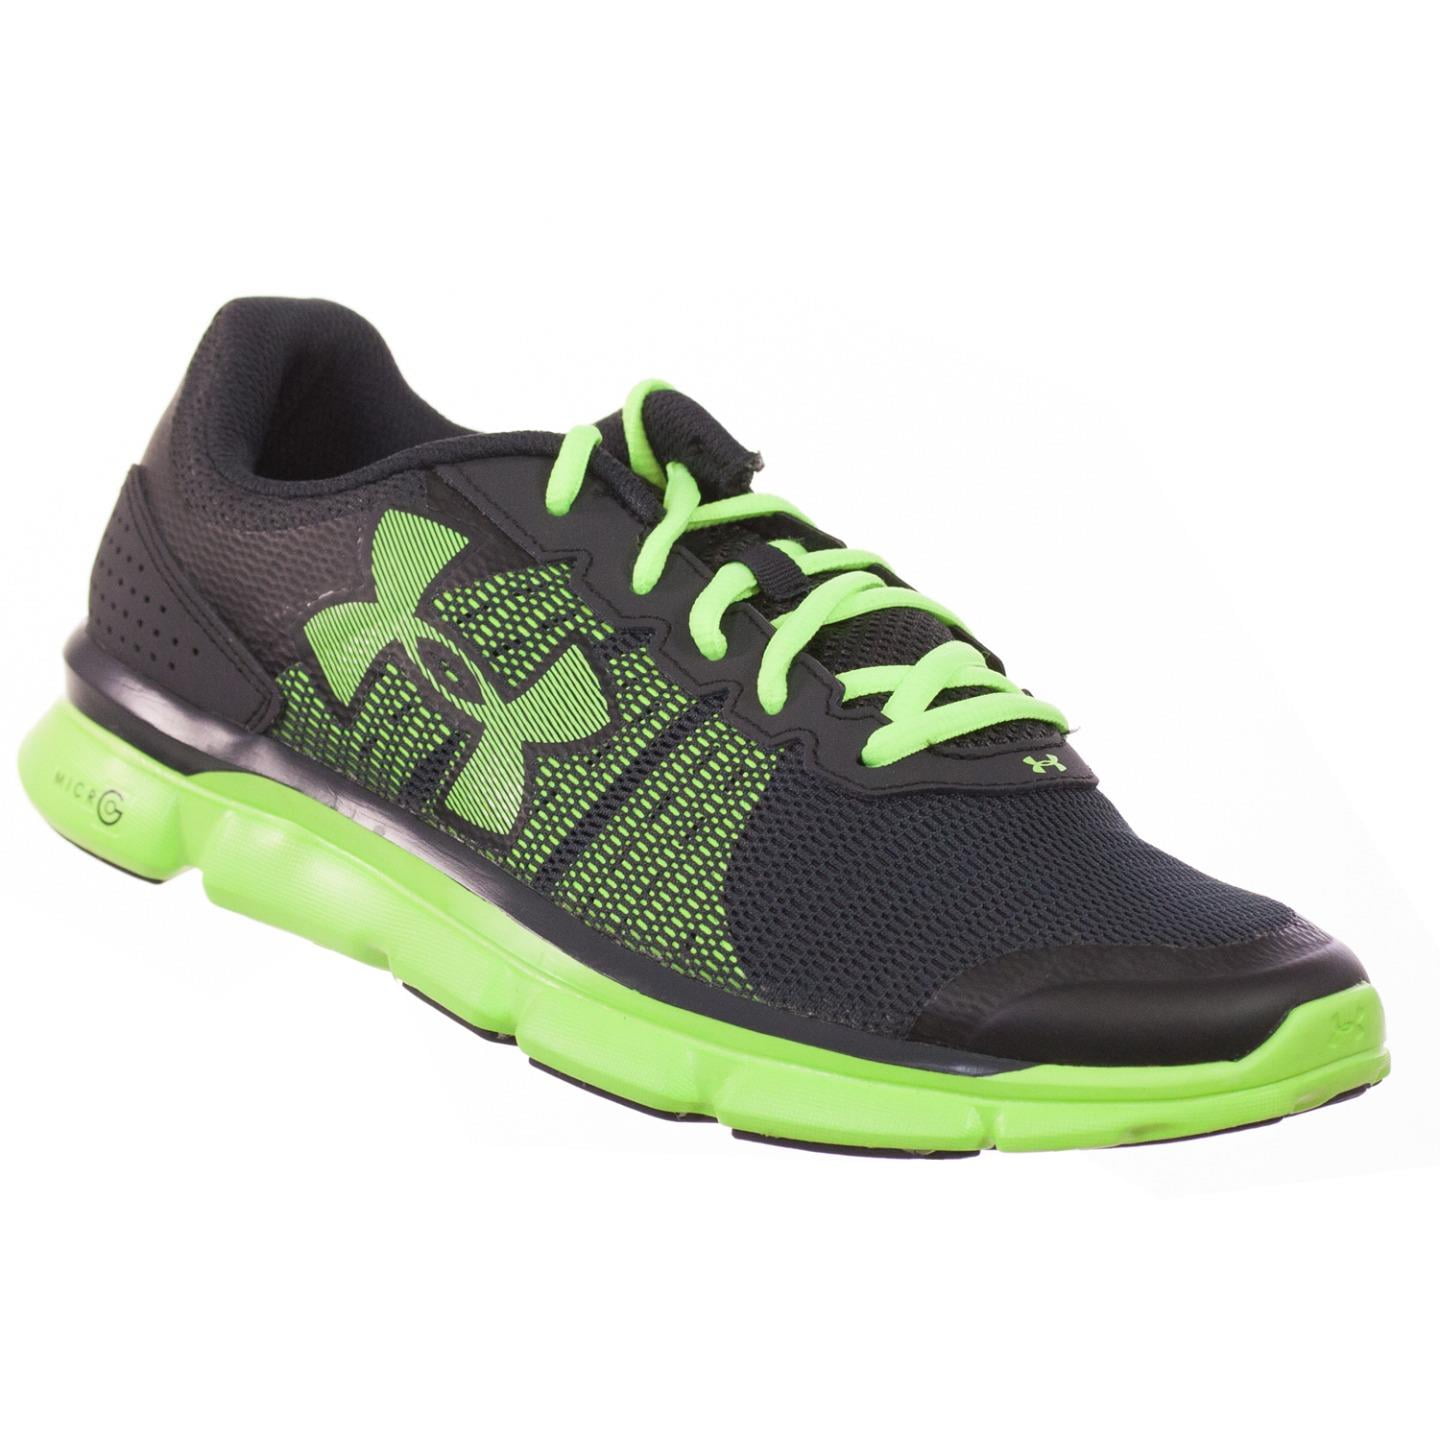 black and lime green tennis shoes